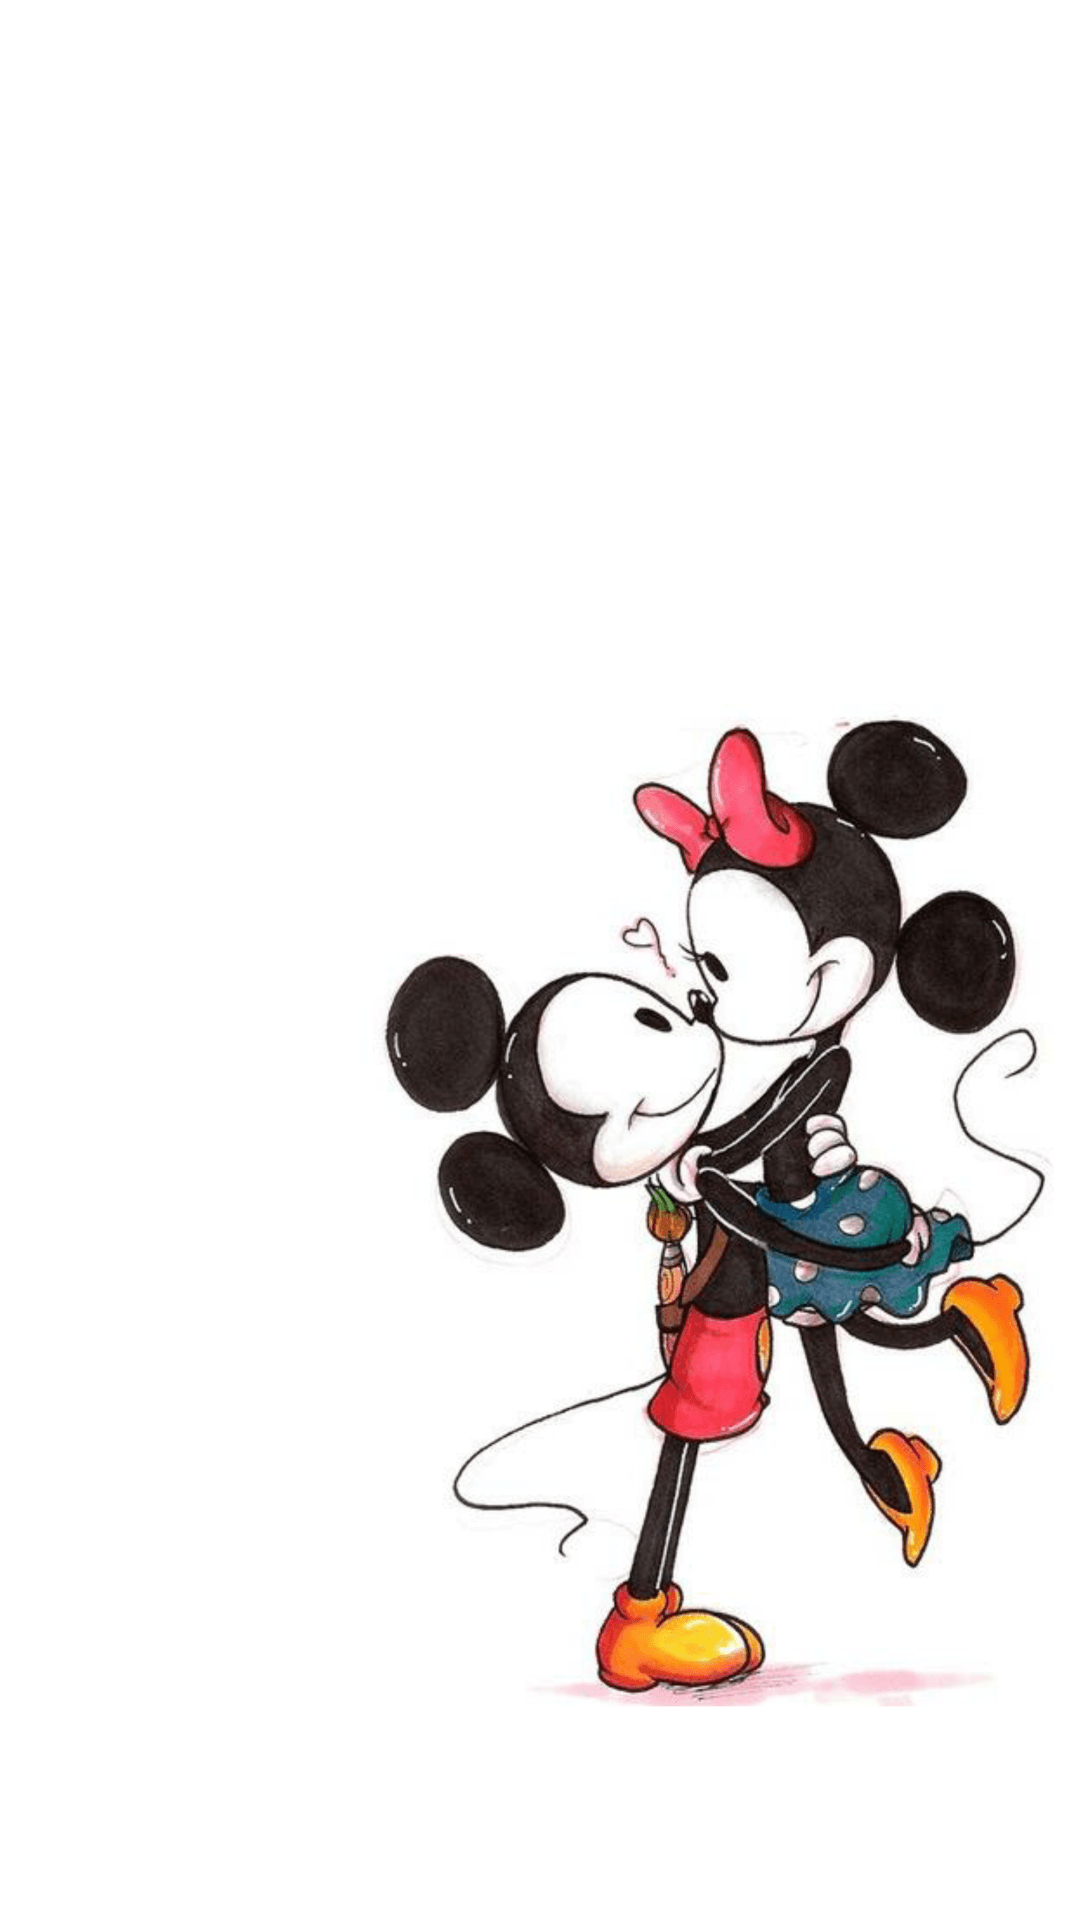 Vintage Mickey and Minnie Wallpaper Free Vintage Mickey and Minnie Background